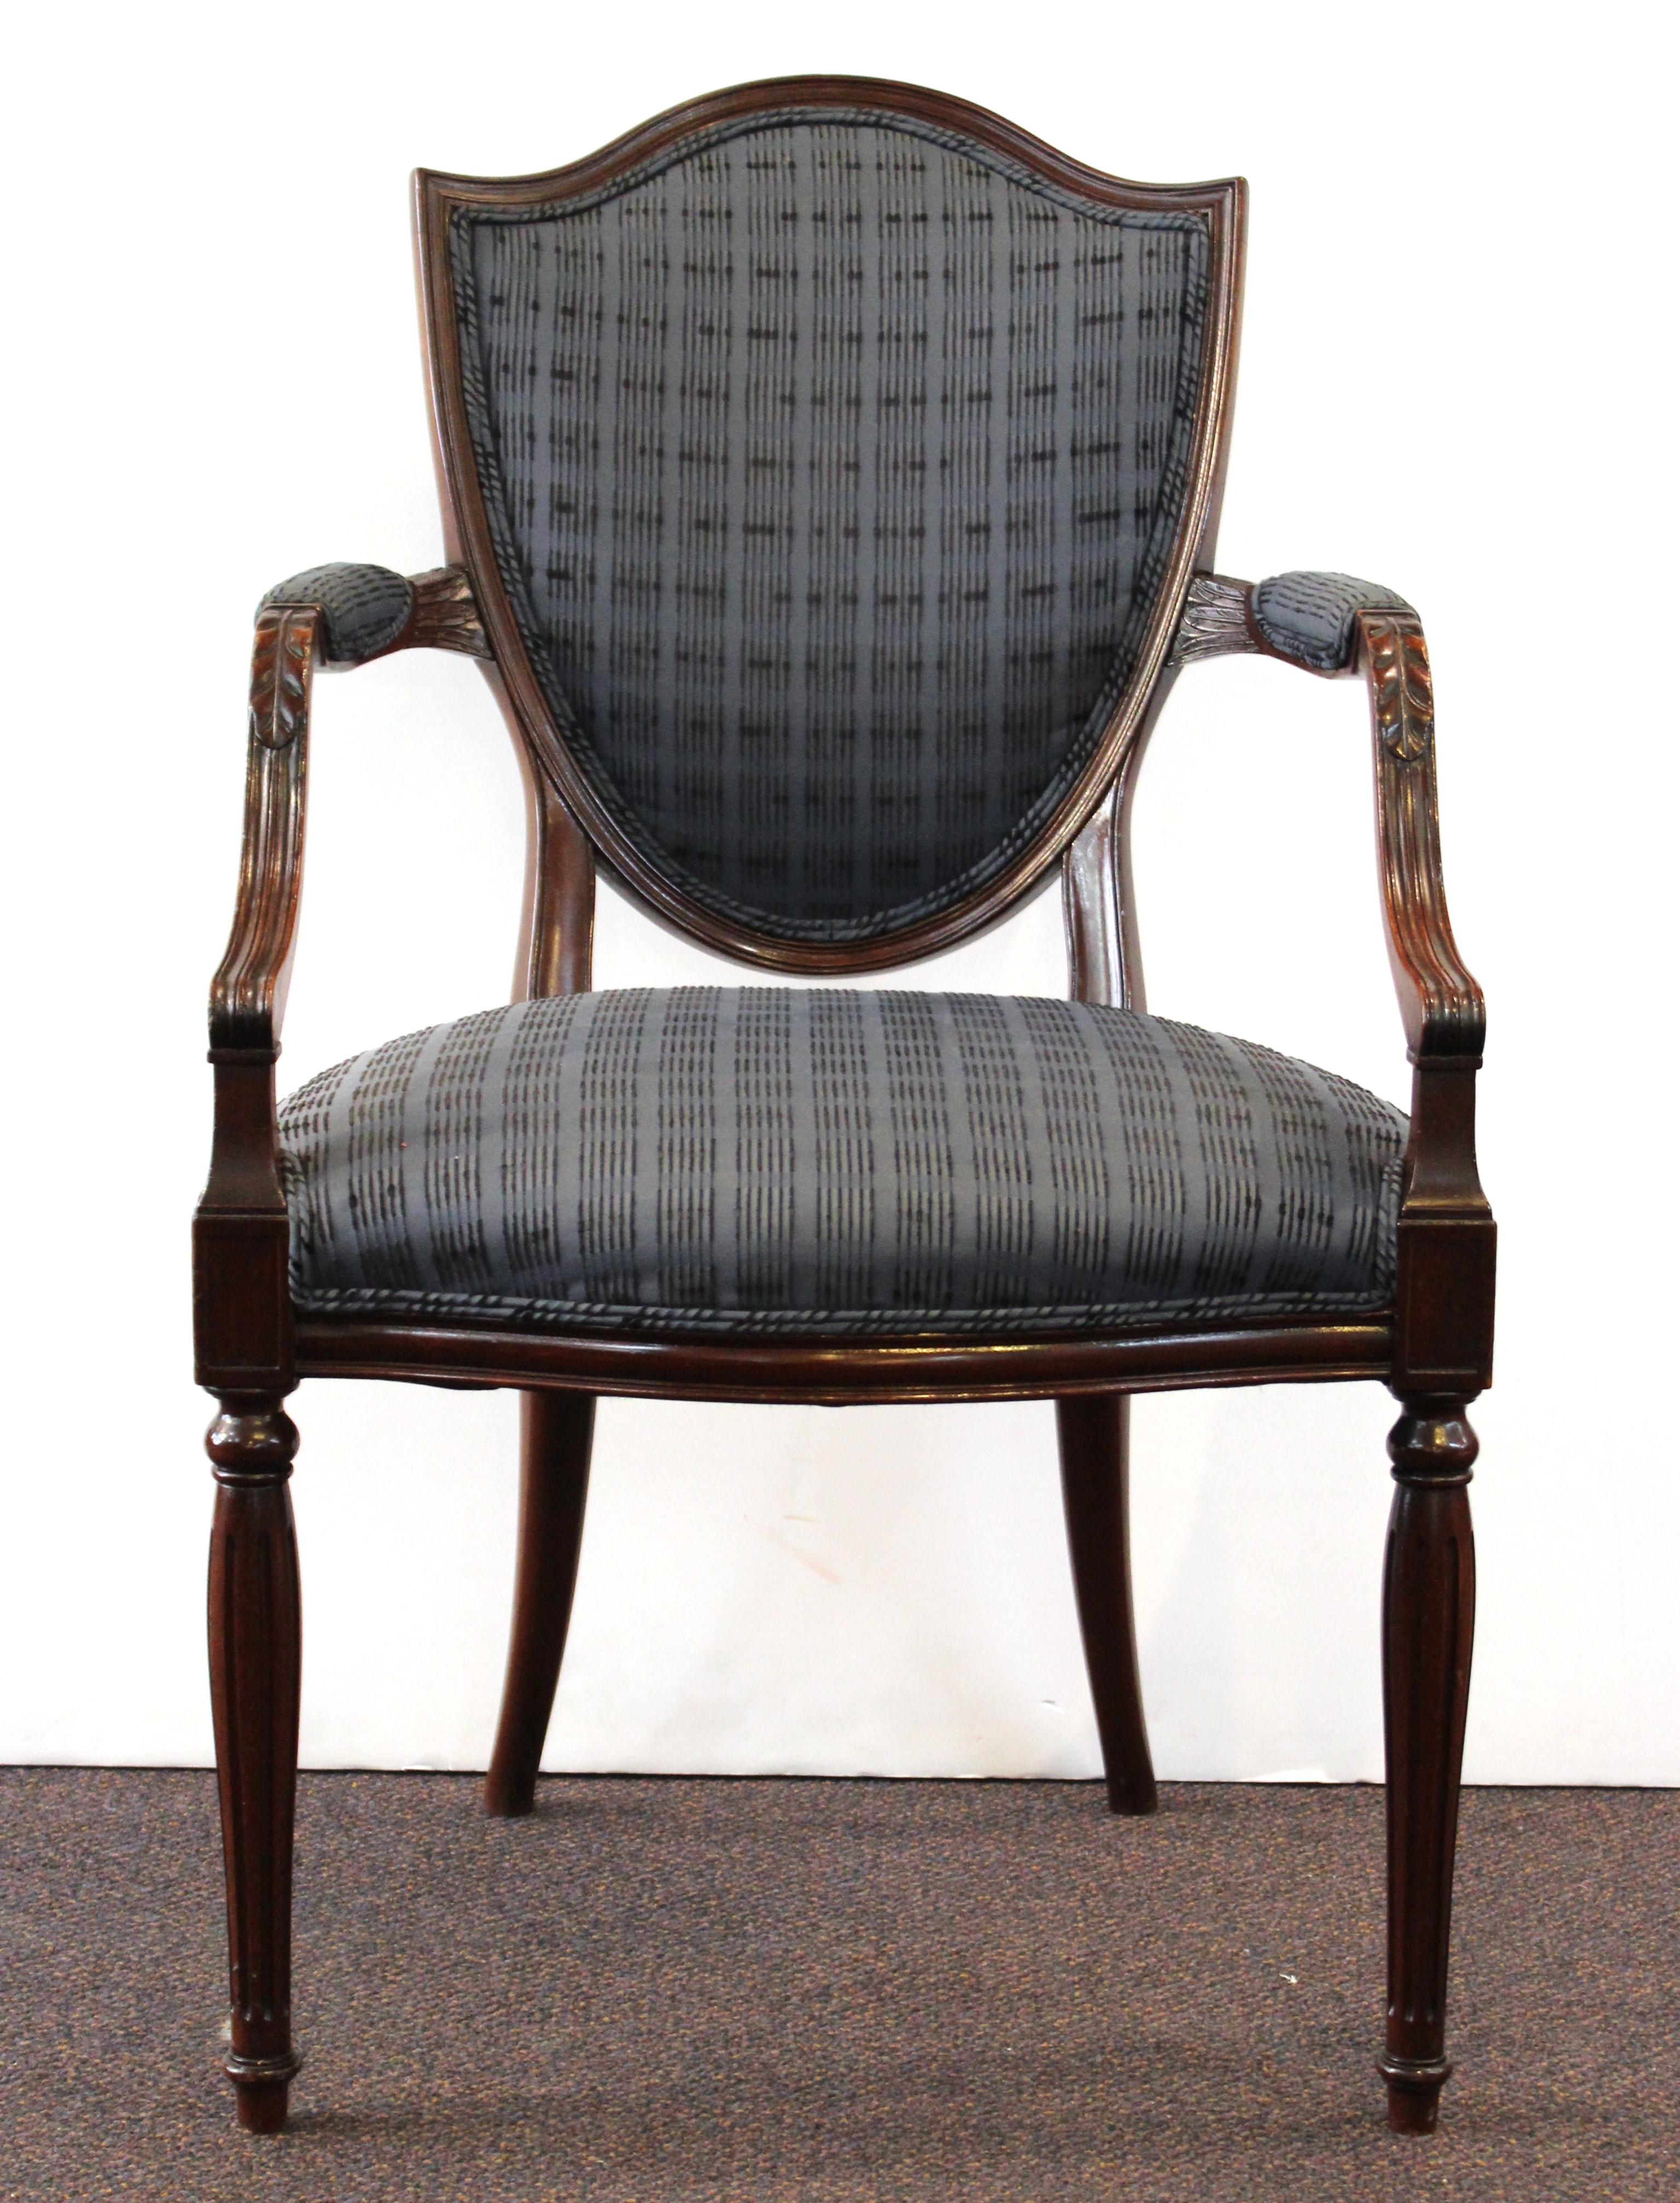 Pair of Neoclassical Revival style armchairs in carved wood with shield-shaped backs and neoclassical detailing on the armrests and modern upholstery. The pair is in great vintage condition with minor age-appropriate wear and use.